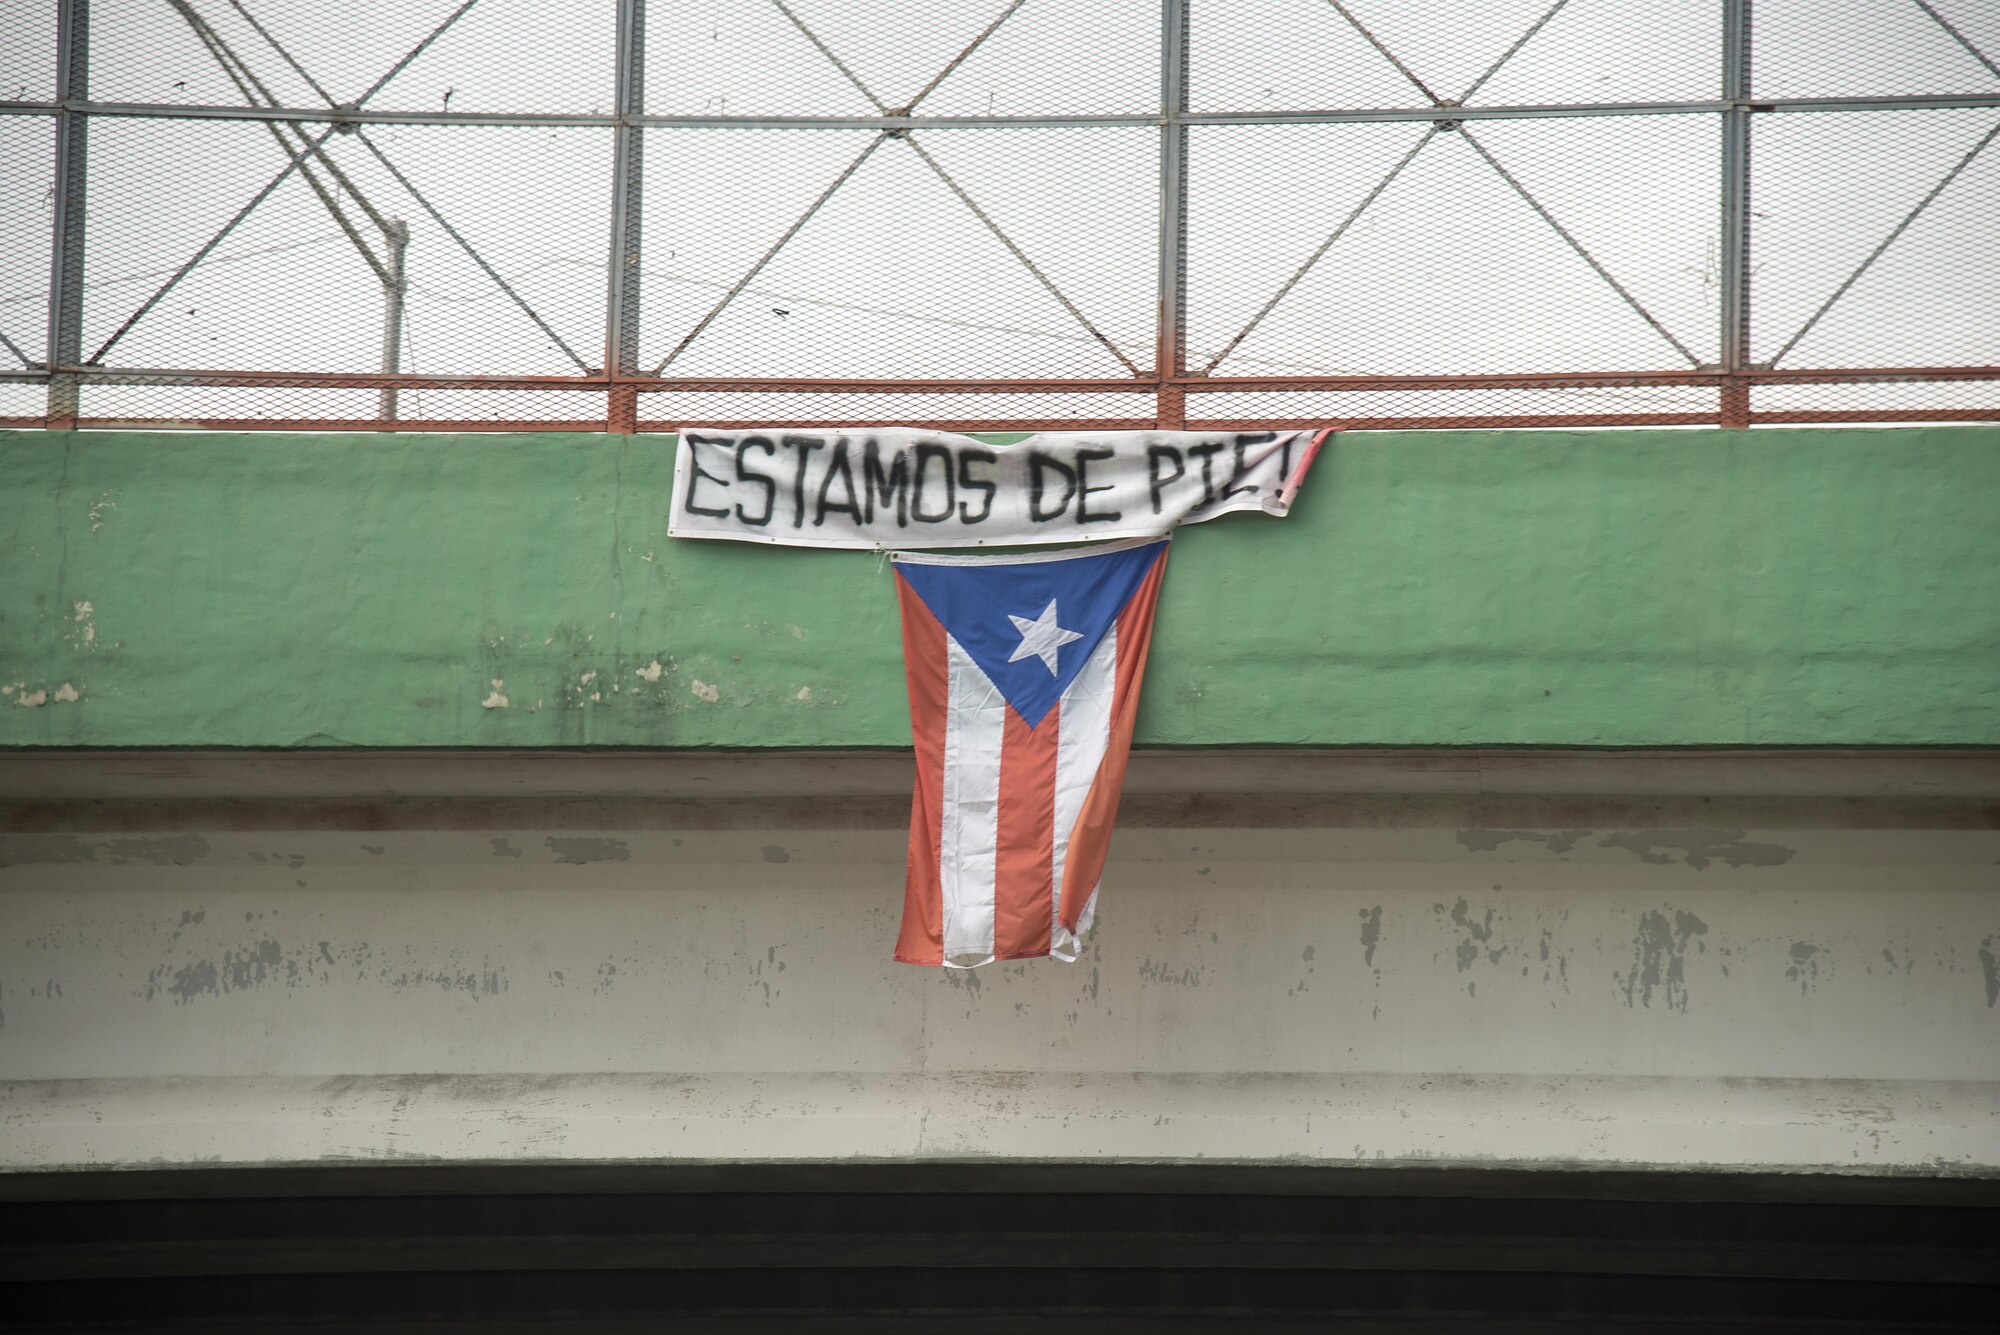 A flag hangs from a highway overpass that reads “Estamos de pie,” in Caguas, Puerto Rico, Oct. 2, 2017. “Estamos de pie” translates to “We are standing,” which is meant to motivate people to stay strong and overcome the disaster left behind Hurricane Maria.